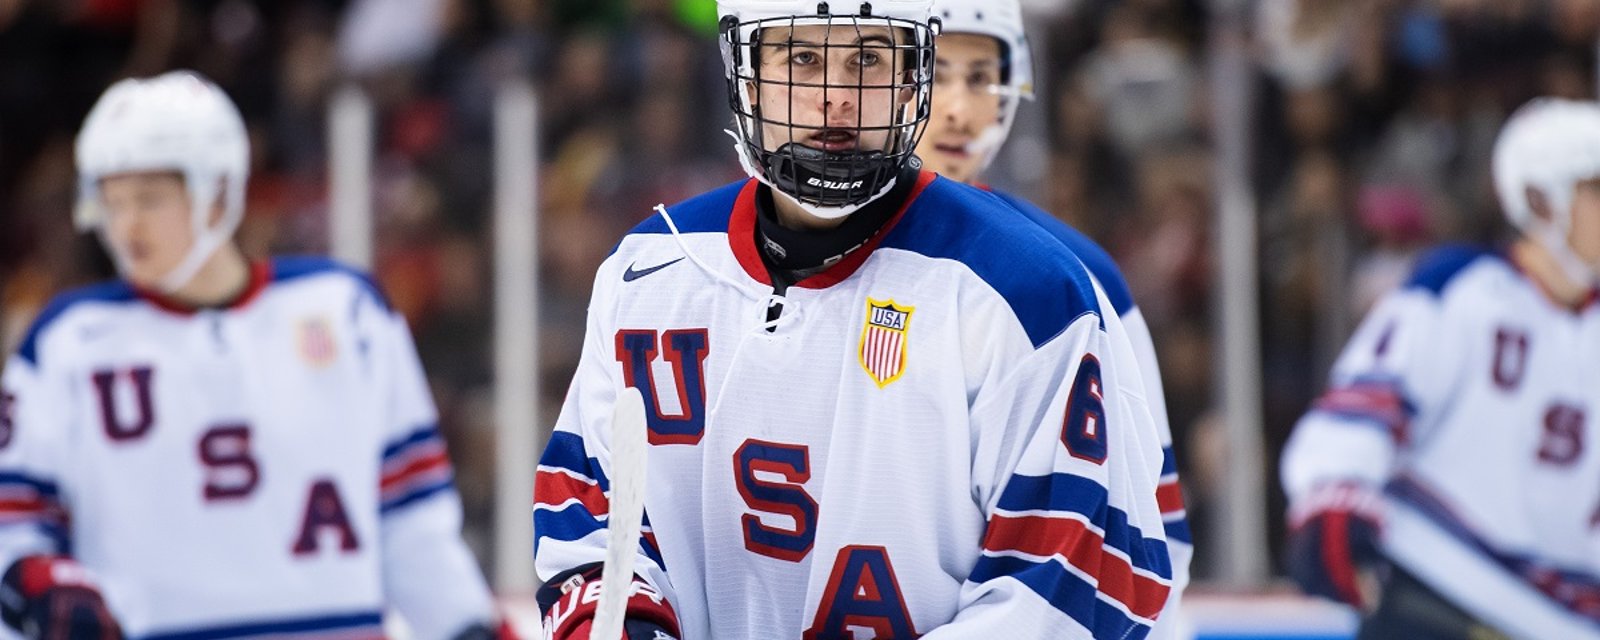 Rumor: Hughes no longer the clear #1 pick at the 2019 NHL draft.